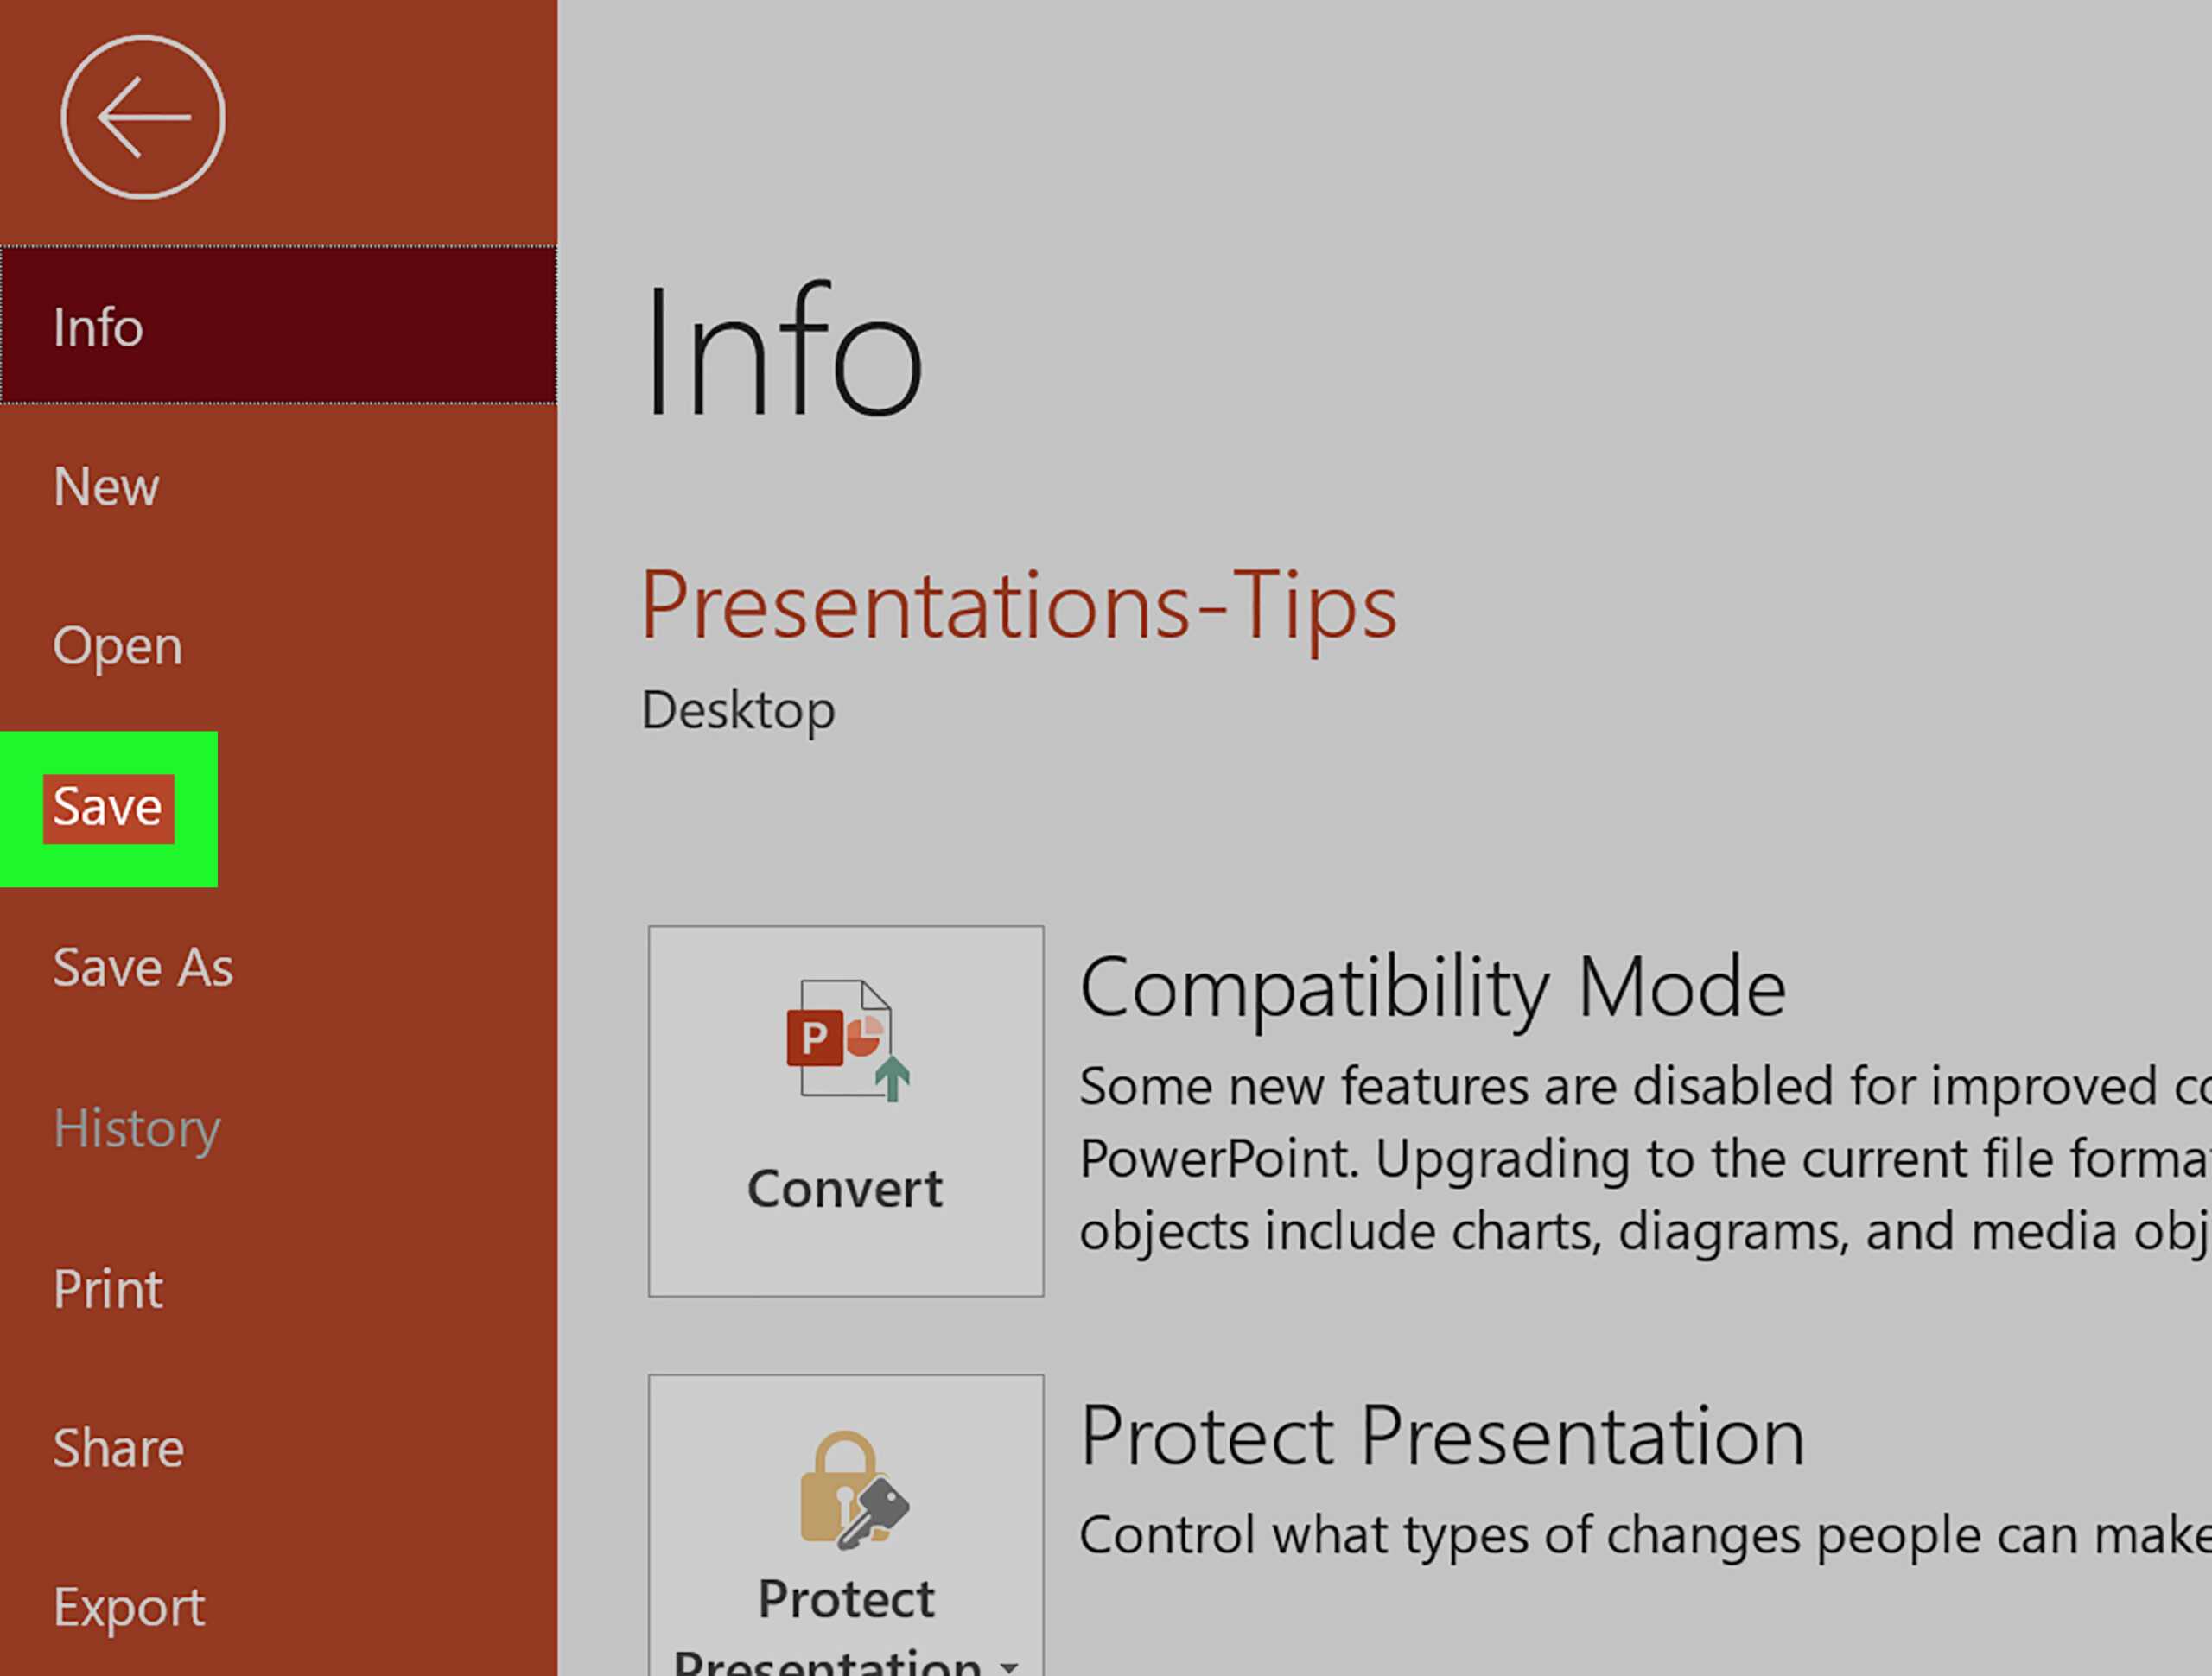 How To Edit A Powerpoint Template: 6 Steps (With Pictures) Within How To Edit A Powerpoint Template